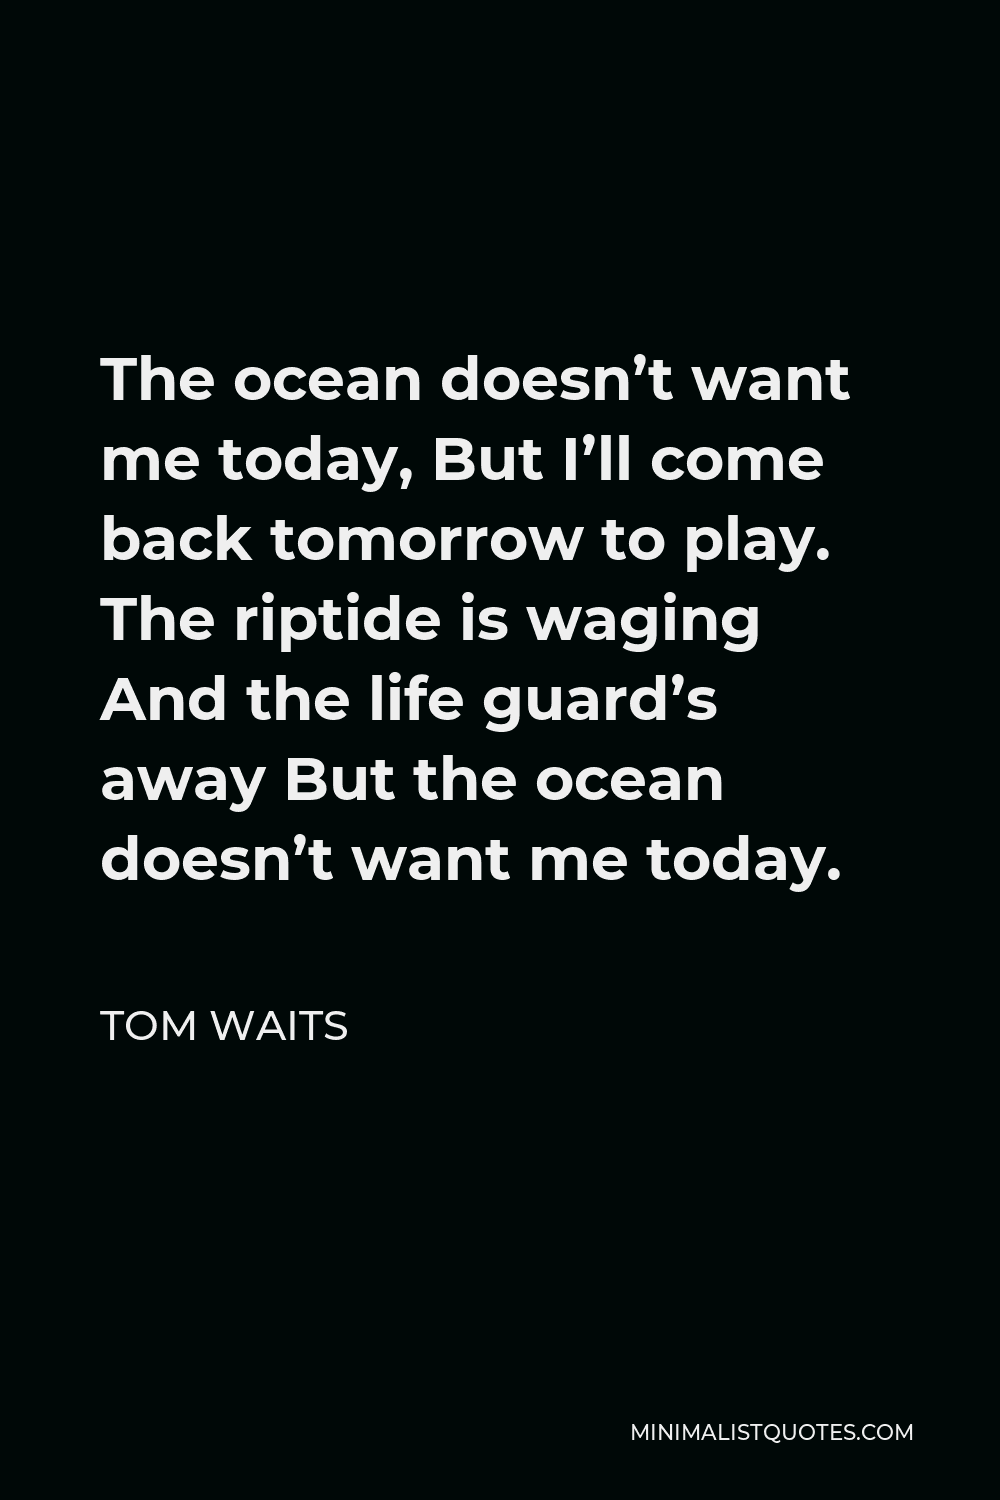 Tom Waits Quote - The ocean doesn’t want me today, But I’ll come back tomorrow to play. The riptide is waging And the life guard’s away But the ocean doesn’t want me today.